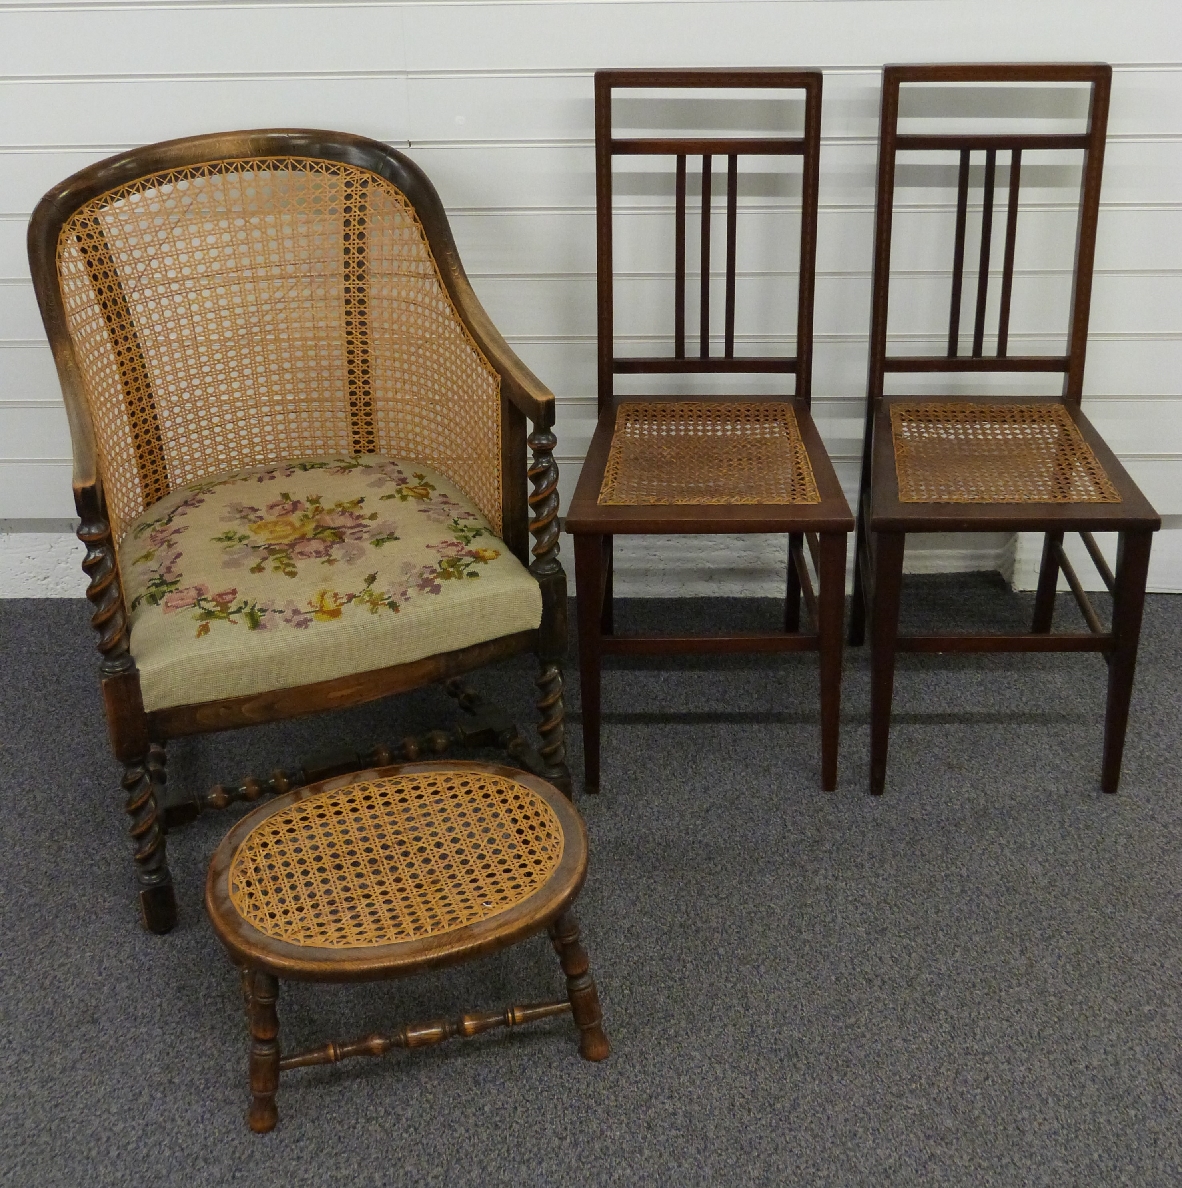 Three bergere chairs, one with tapestry upholstery, barley twist legs and a footstool